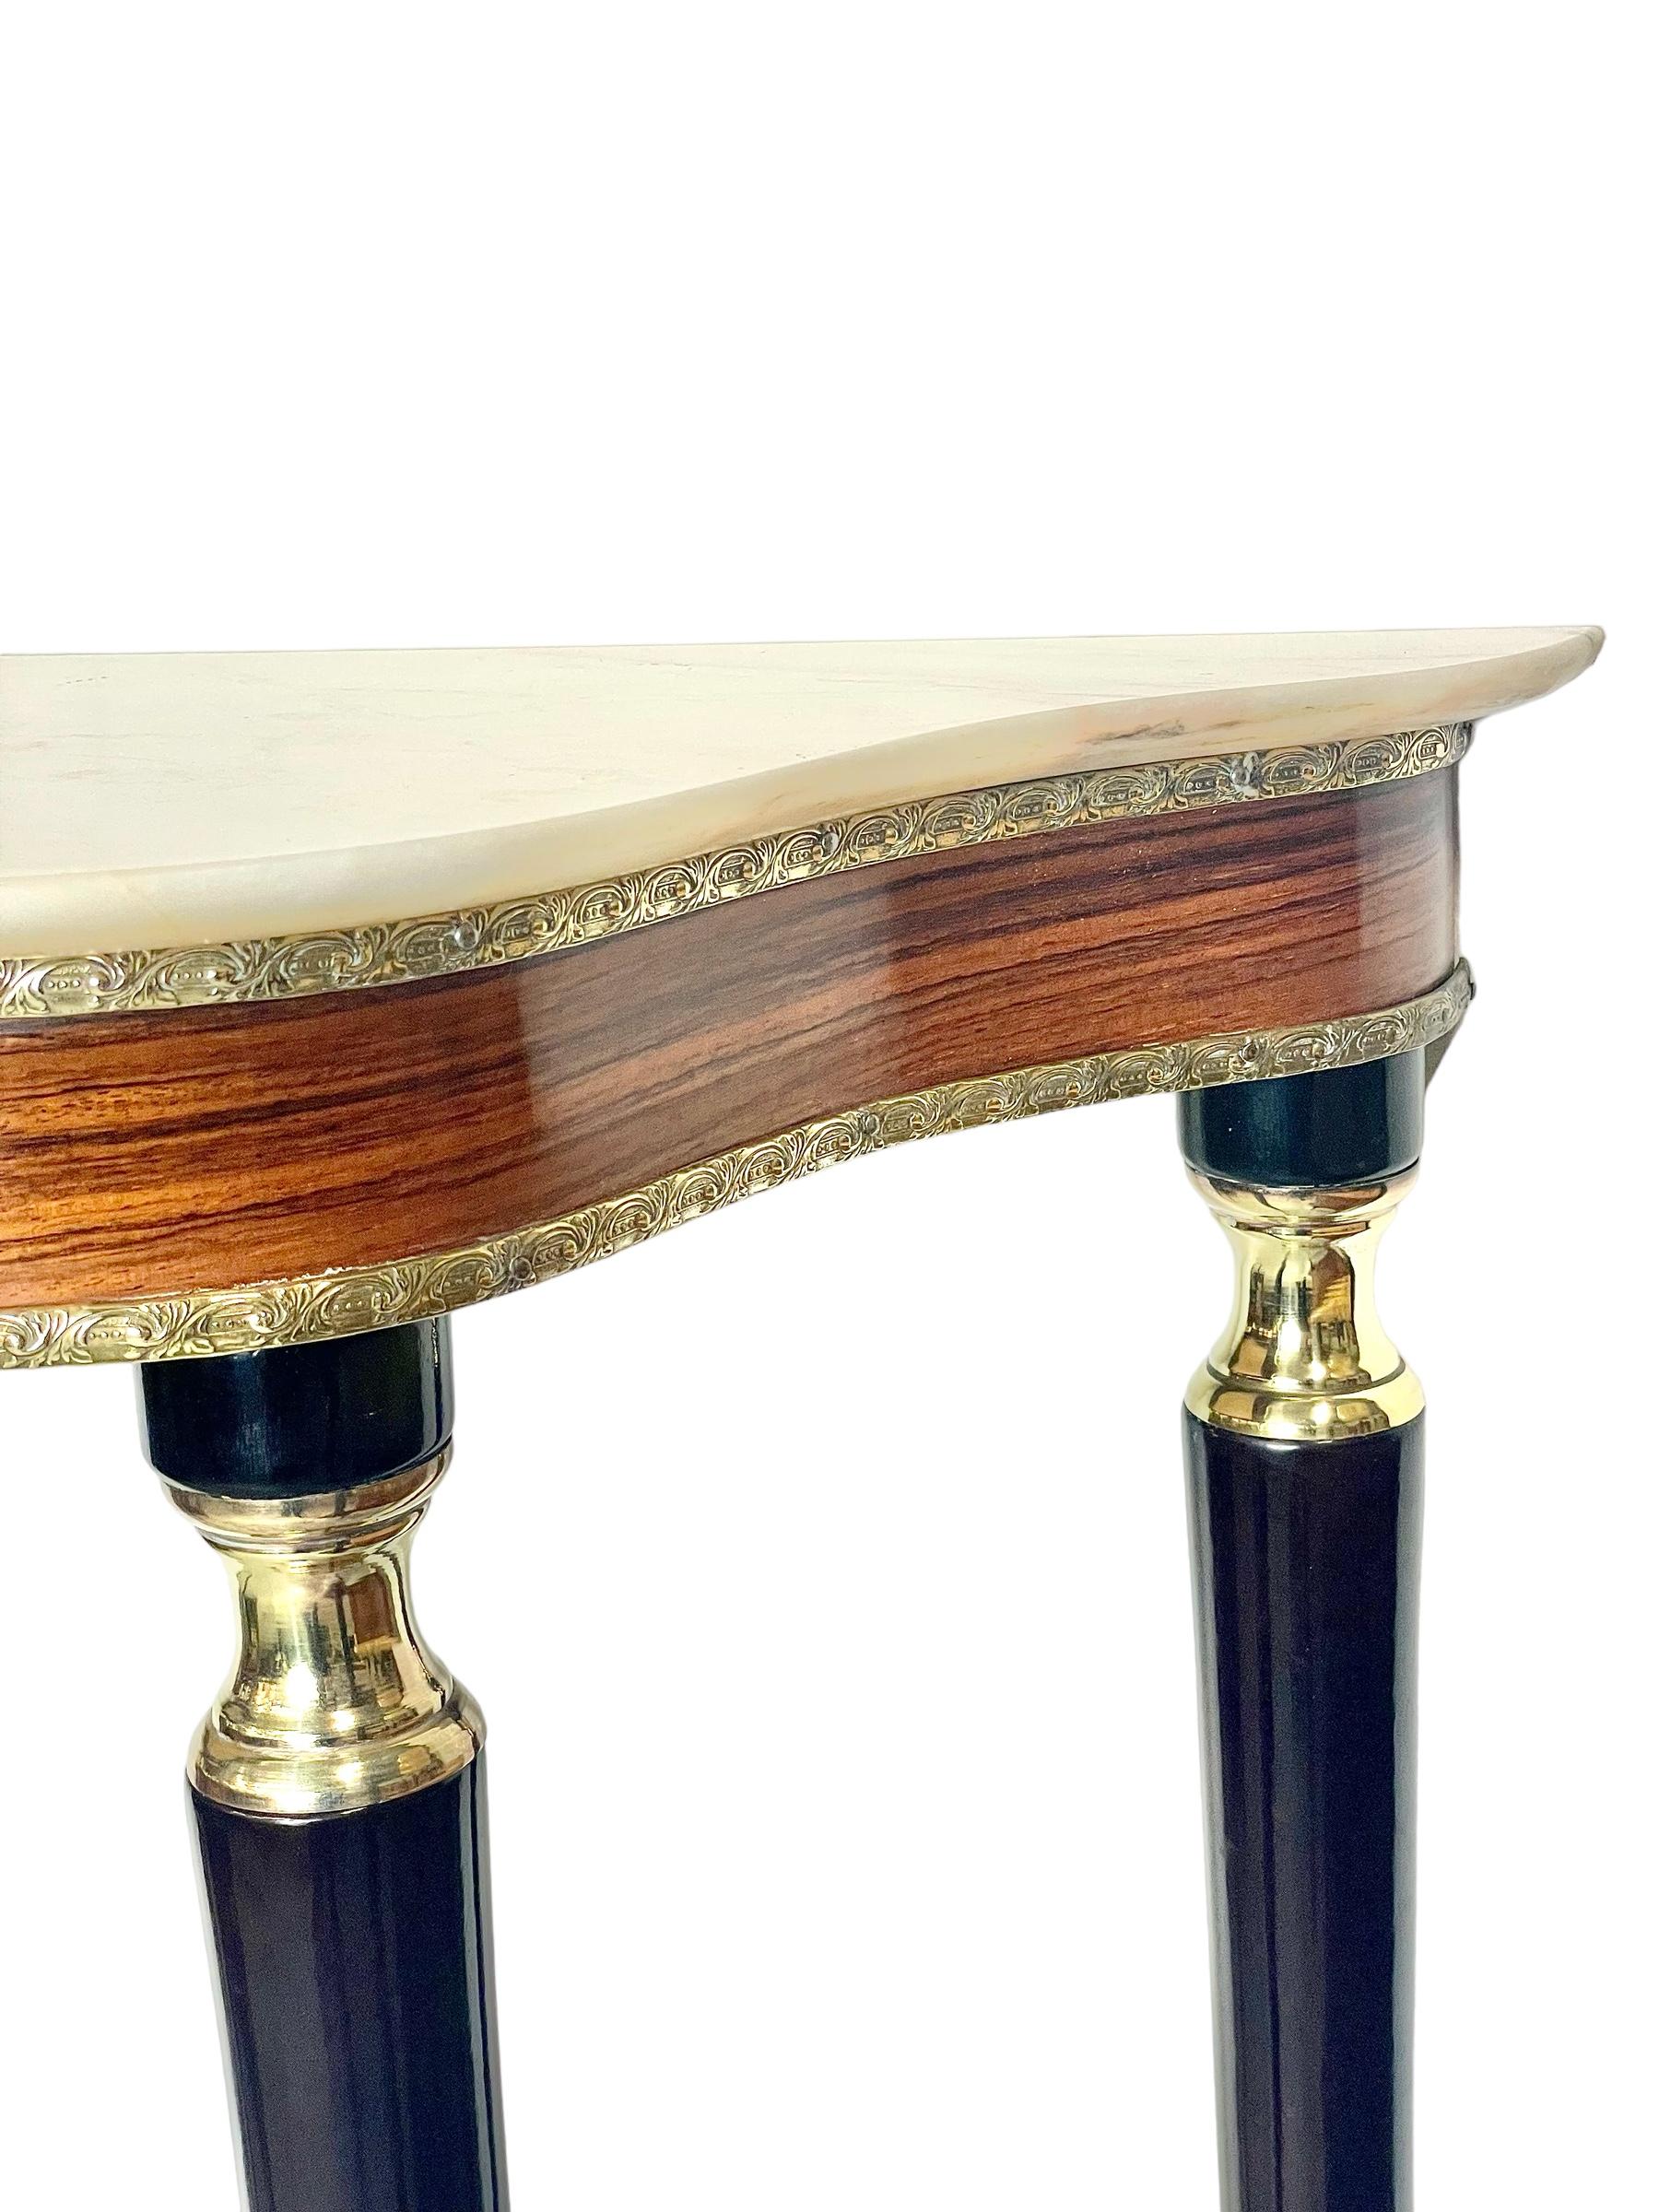 A striking Louis XVI style console table, with a shaped and polished creamy-white marble top. This freestanding table is raised on four tapering, ebonised legs, inset at the top with gleaming brass capitals, and terminating in gilt brass sabot feet.